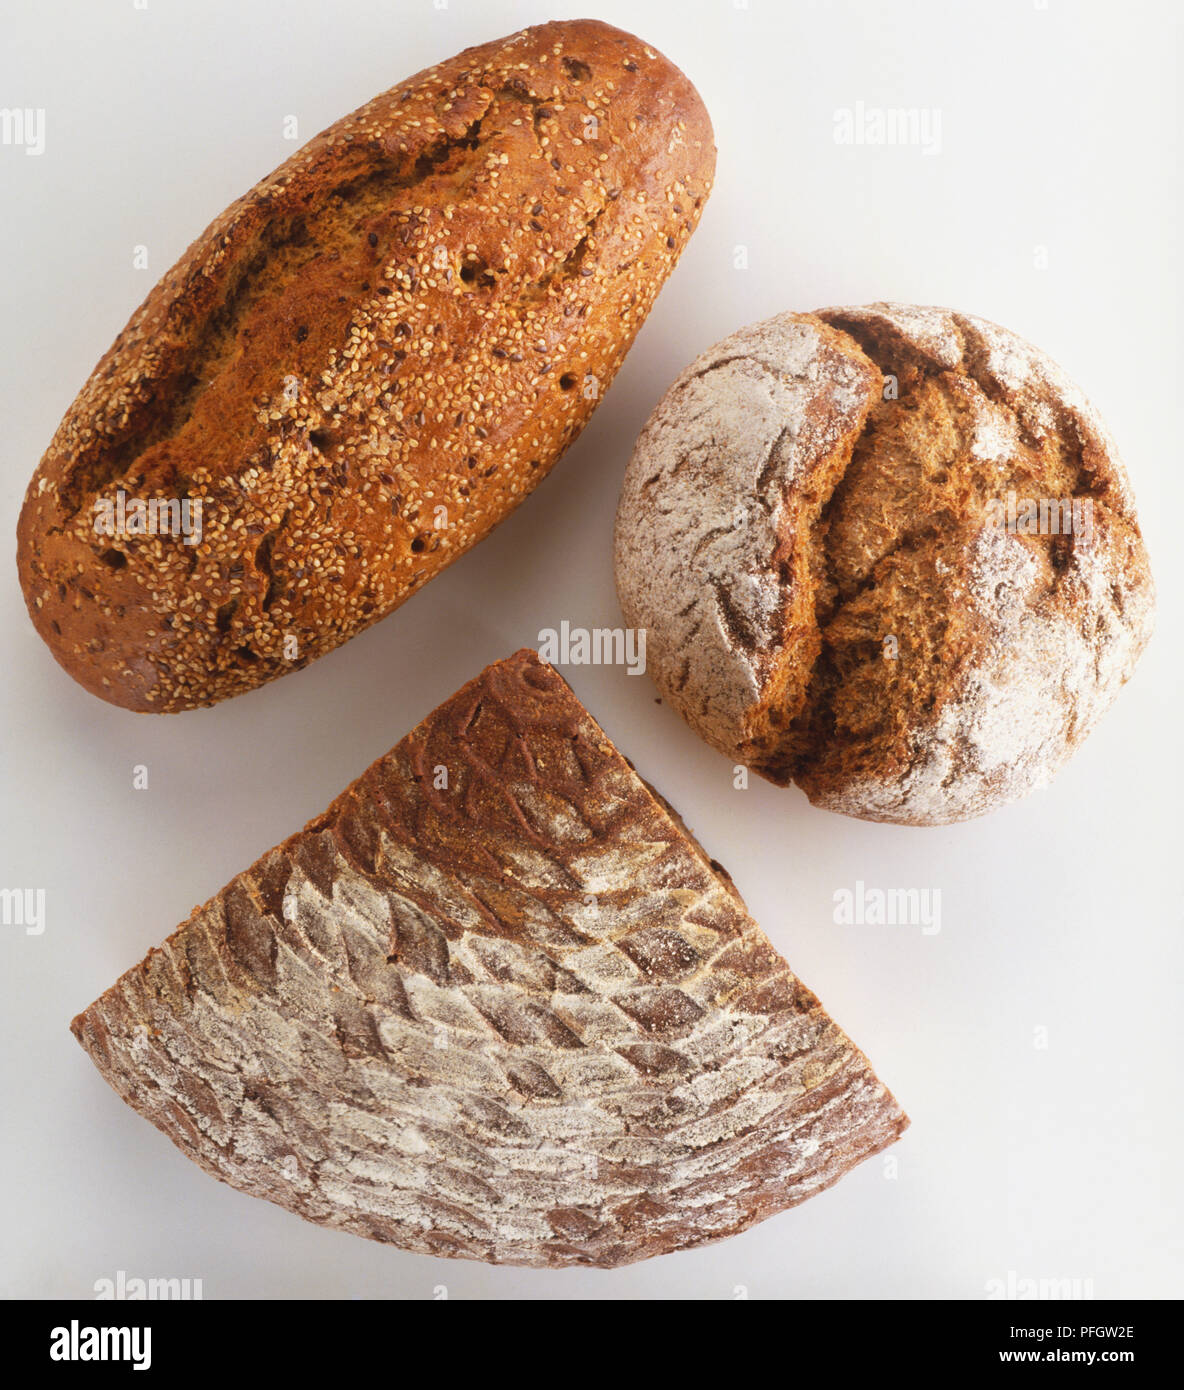 Rustic breads, including triangular chunk of rye bread (Hausbrot), round, crusty loaf of wholemeal bread (Vollkorn-Bauernbrot) and loaf of multi-grain bread (Siebenkornbrot) sprinkled with sesame seeds, view from above Stock Photo